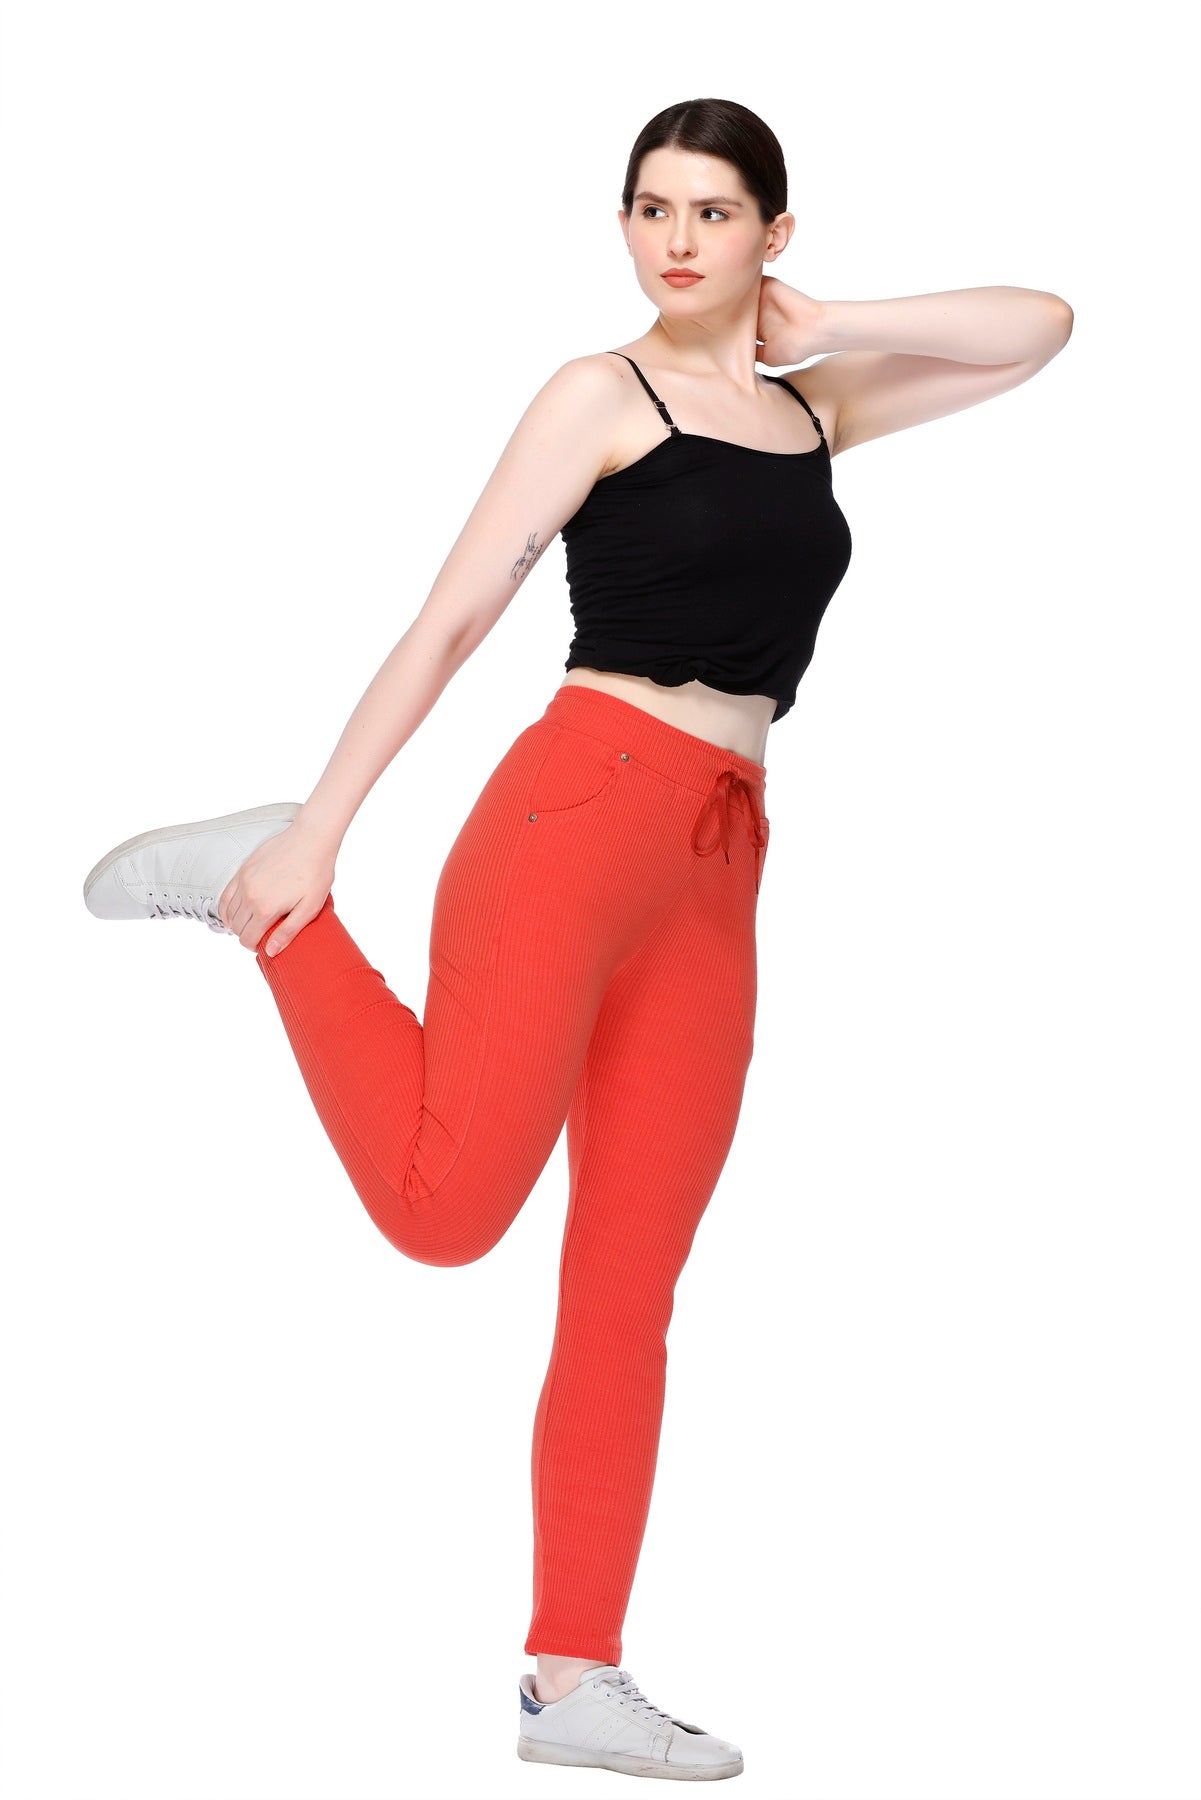 Women Stretchable Slim Fit Yoga Workout Gym Pants with Pockets